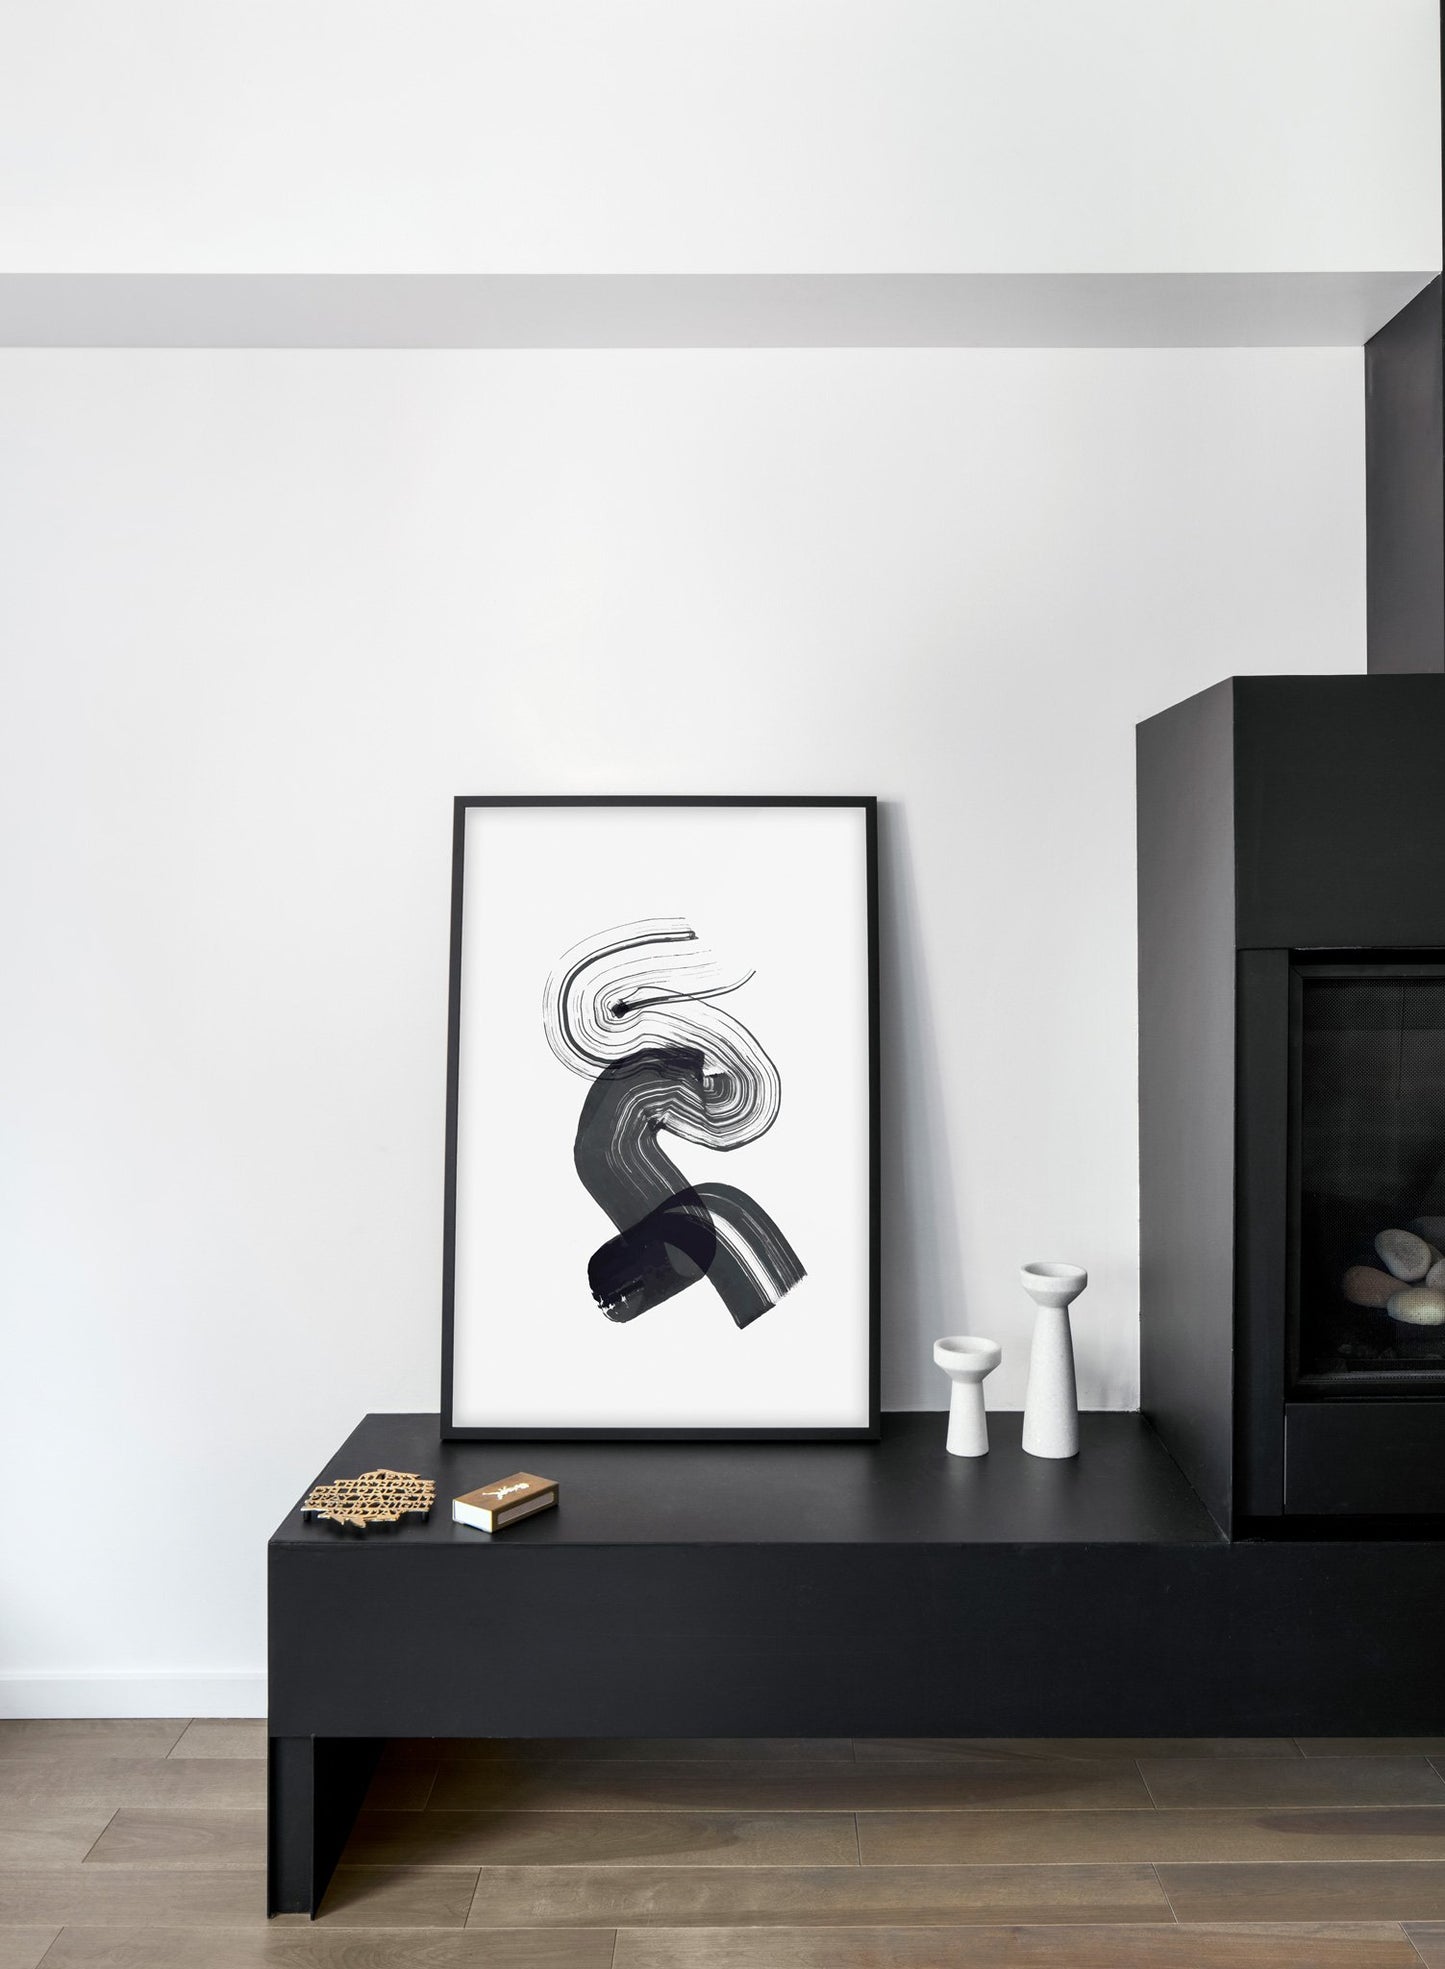 Scandinavian poster by Opposite Wall with hand-made art design Black Curves - Cozy living room with black fireplace